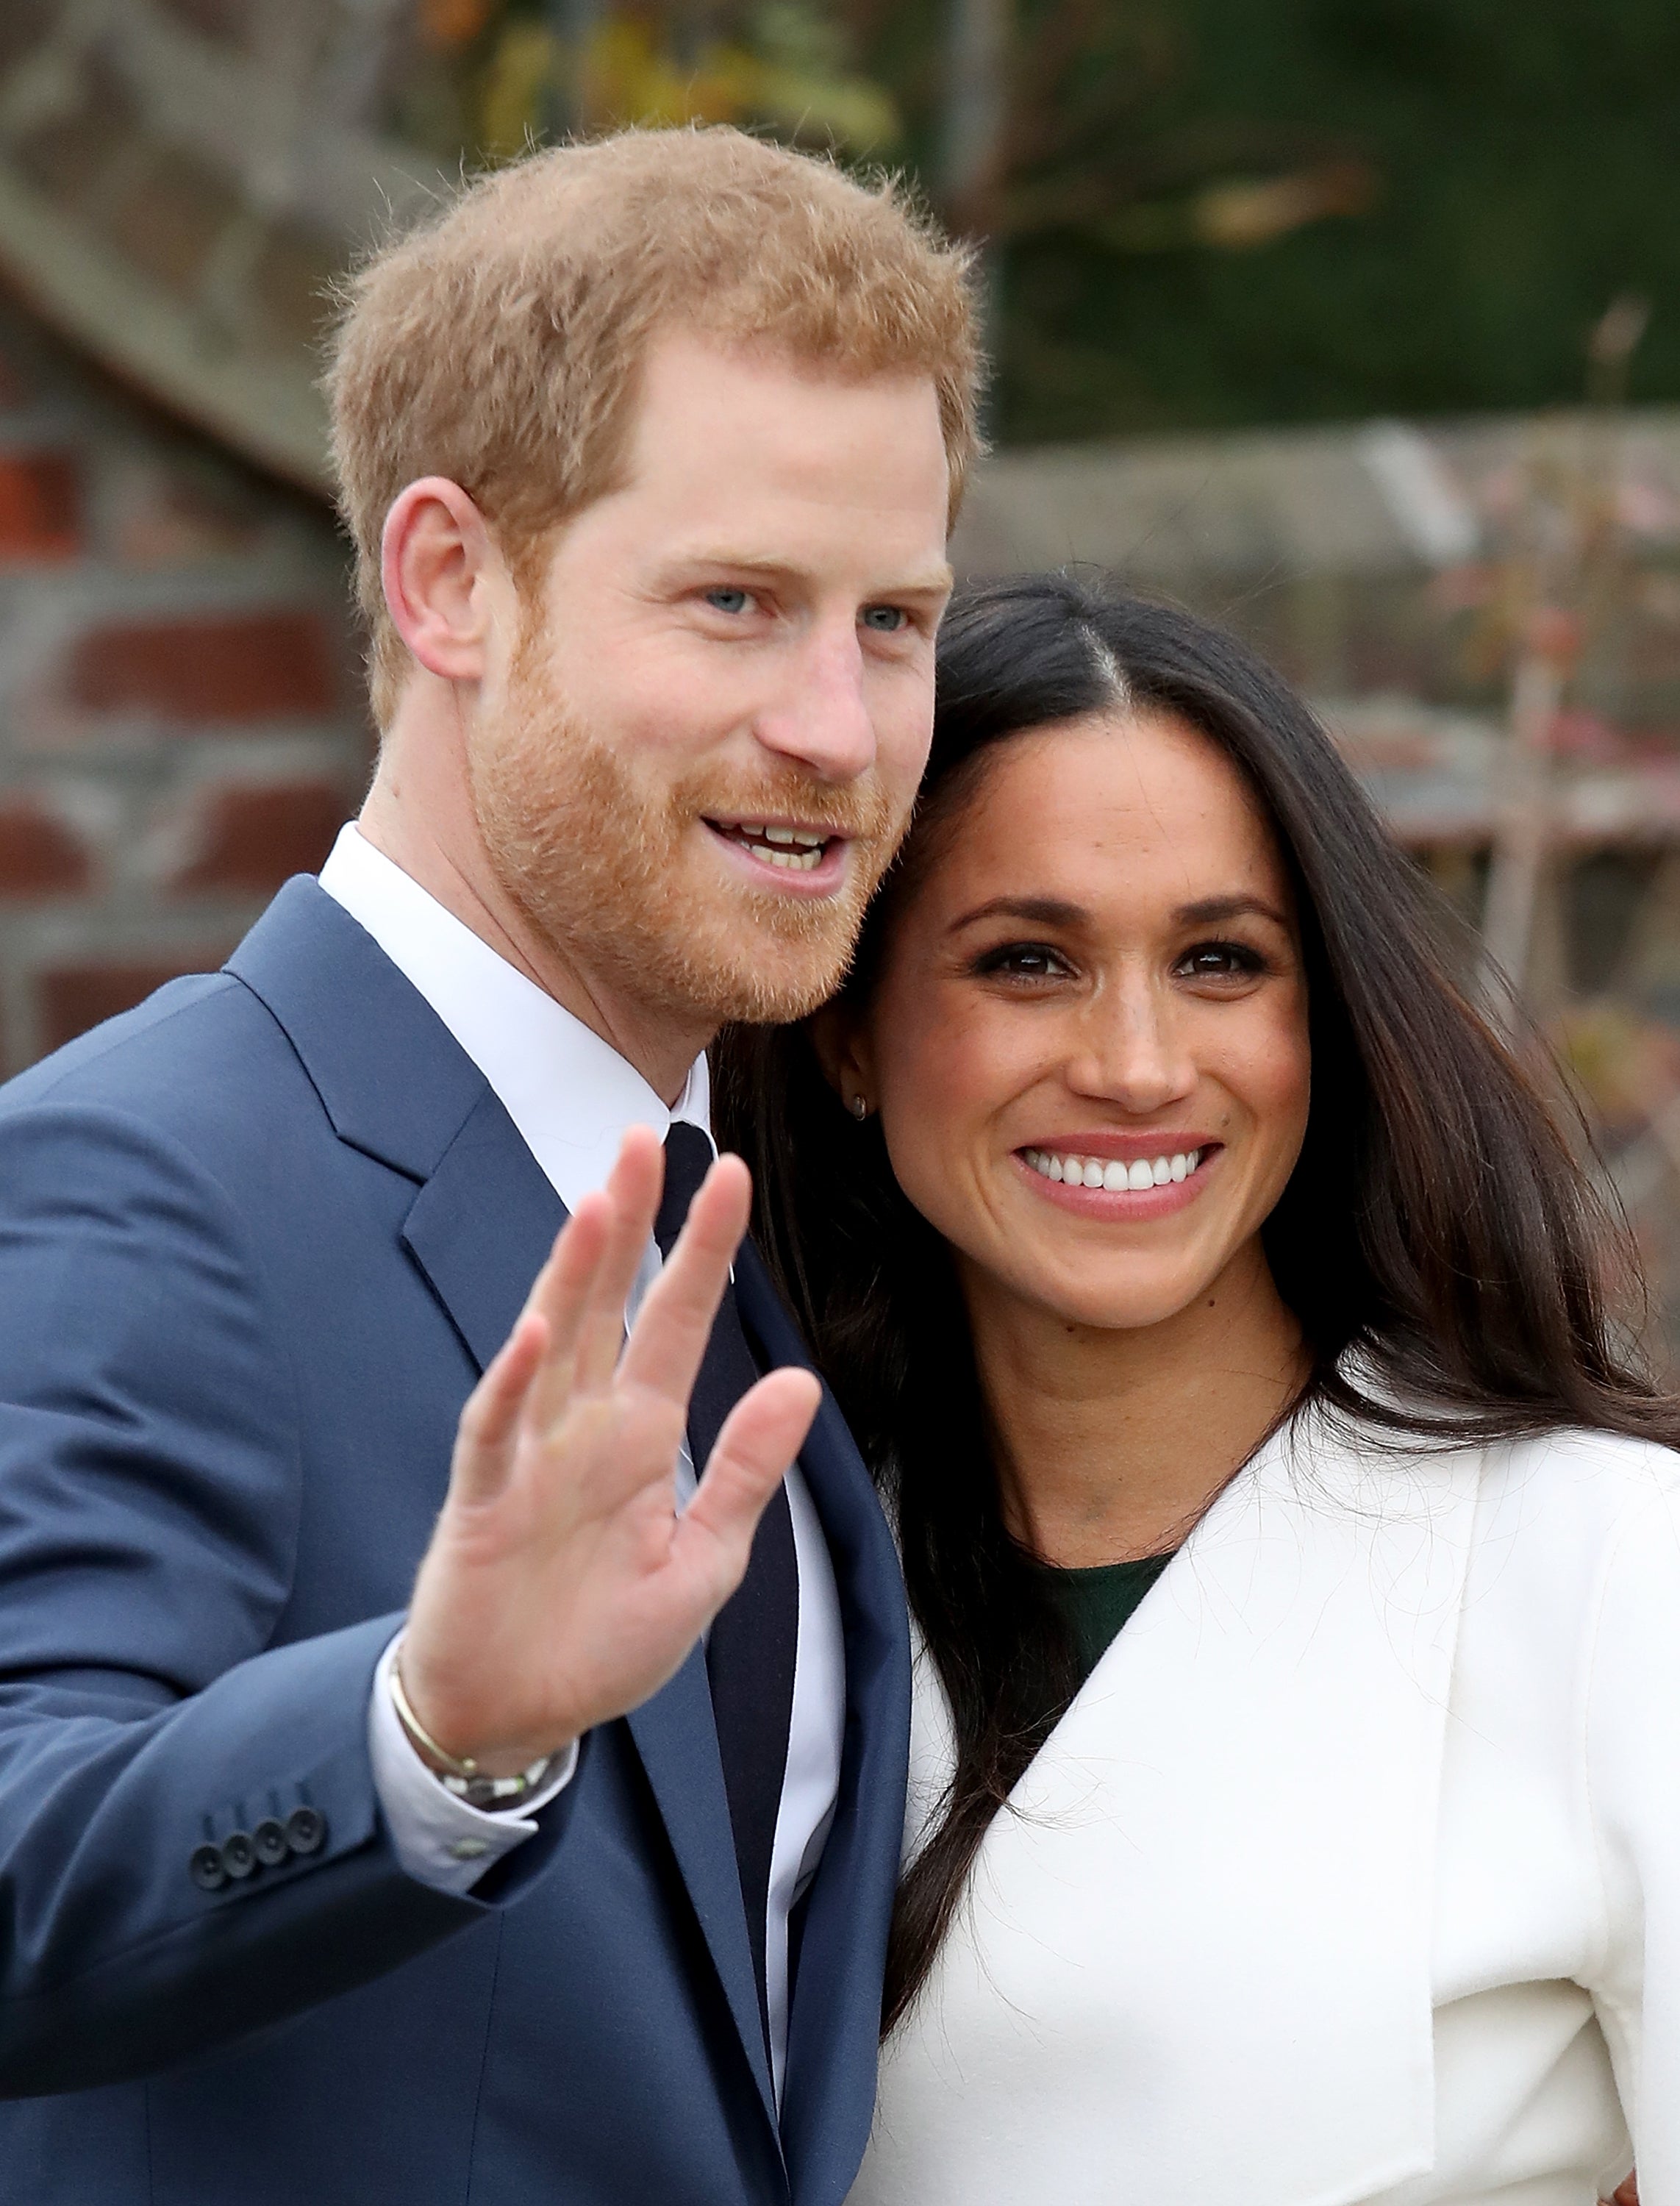 Prince Harry And Meghan Markle Announce Their Wedding Date And Venue!
